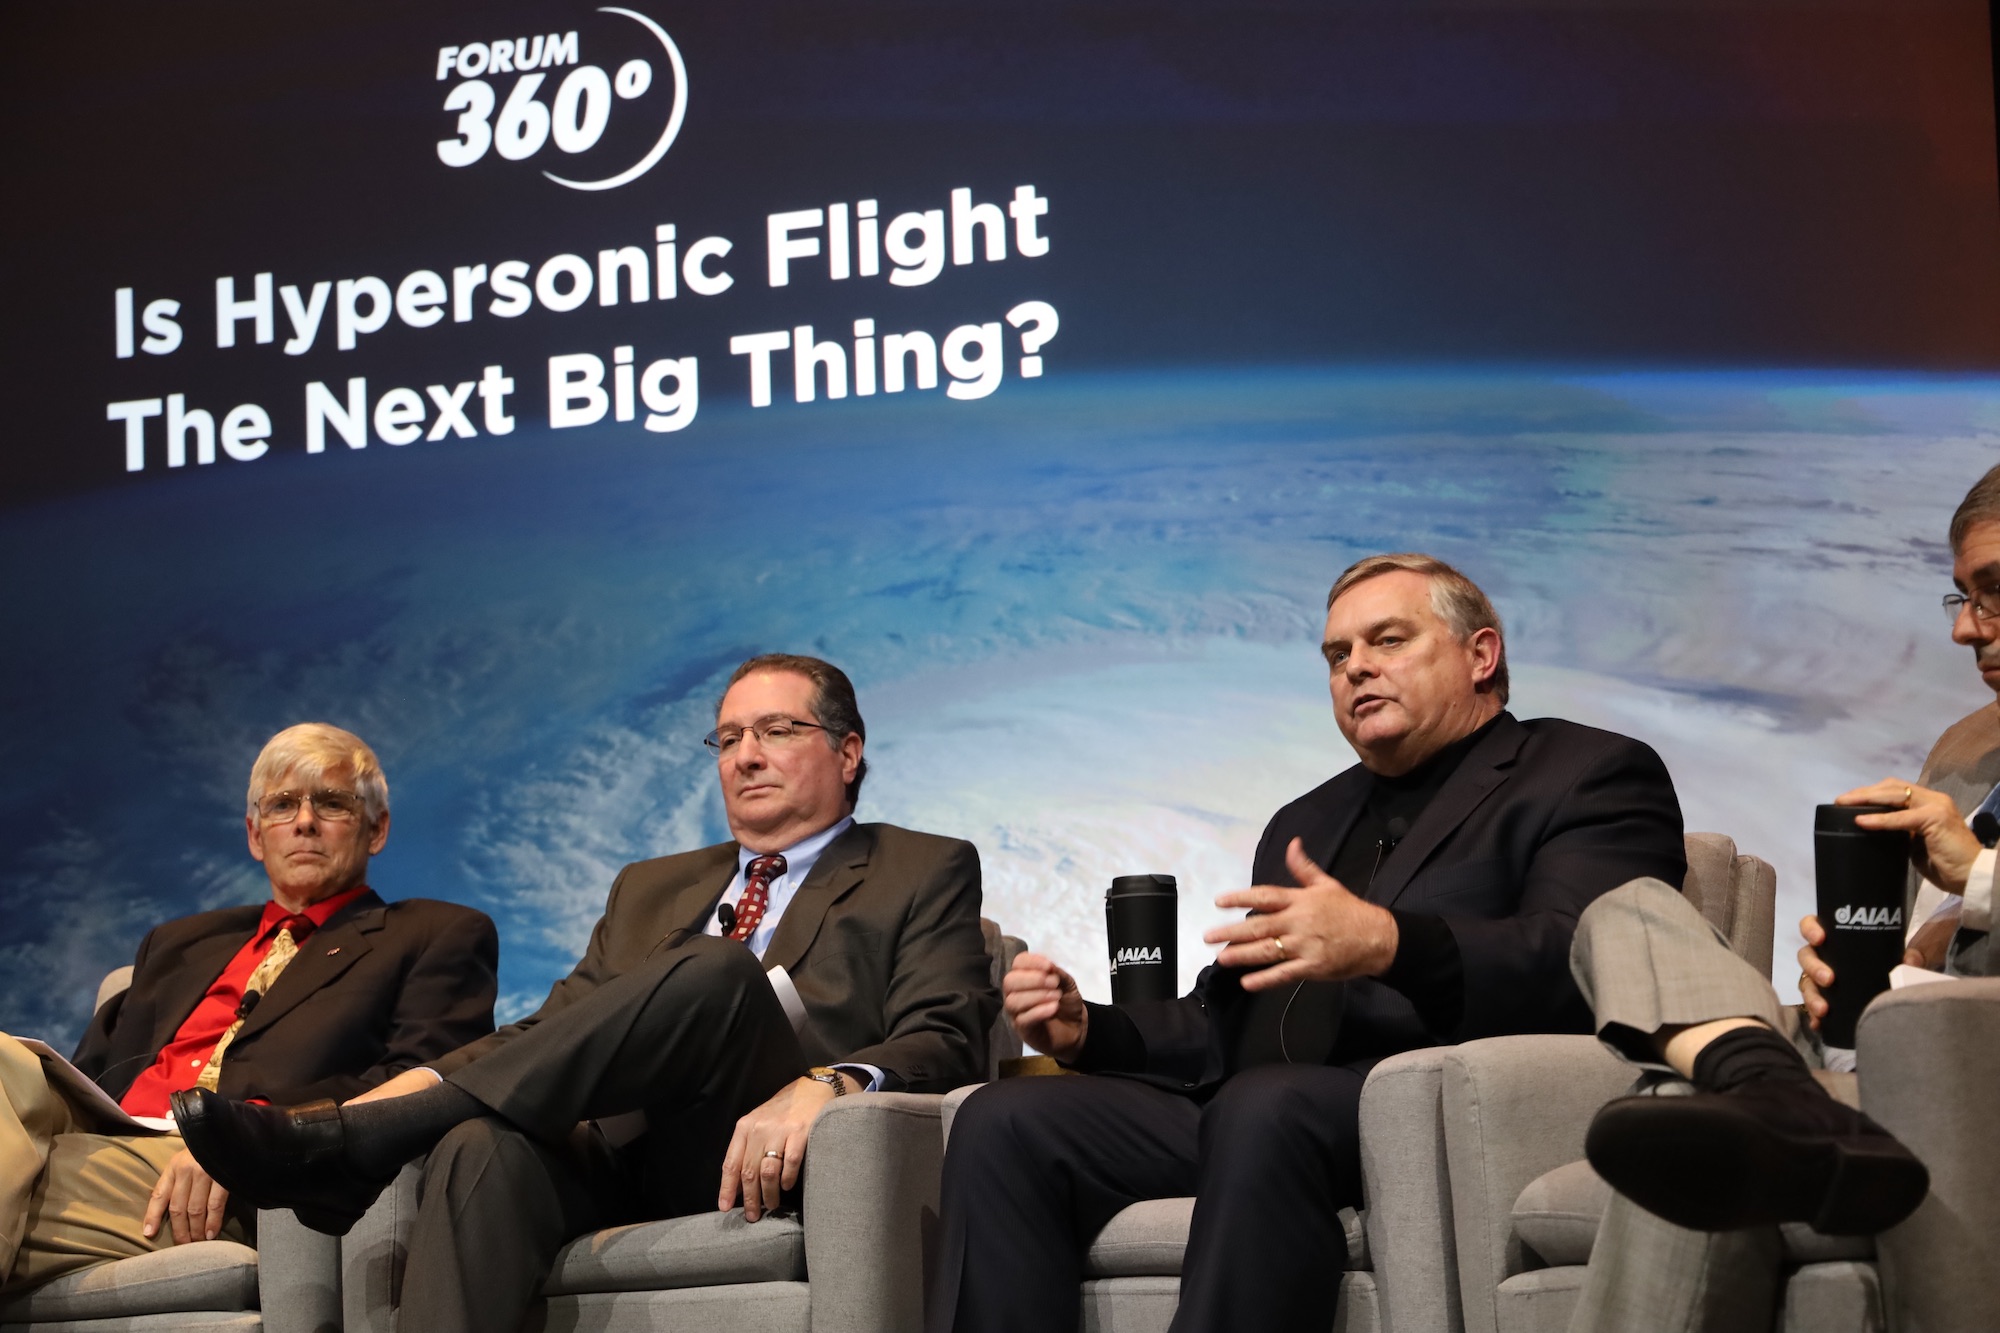 Dave Van Wie, right, answers a question during a hypersonics session at the American Institute of Aeronautics and Astronautics SciTech Forum on Jan. 7 in Orlando, Florida.